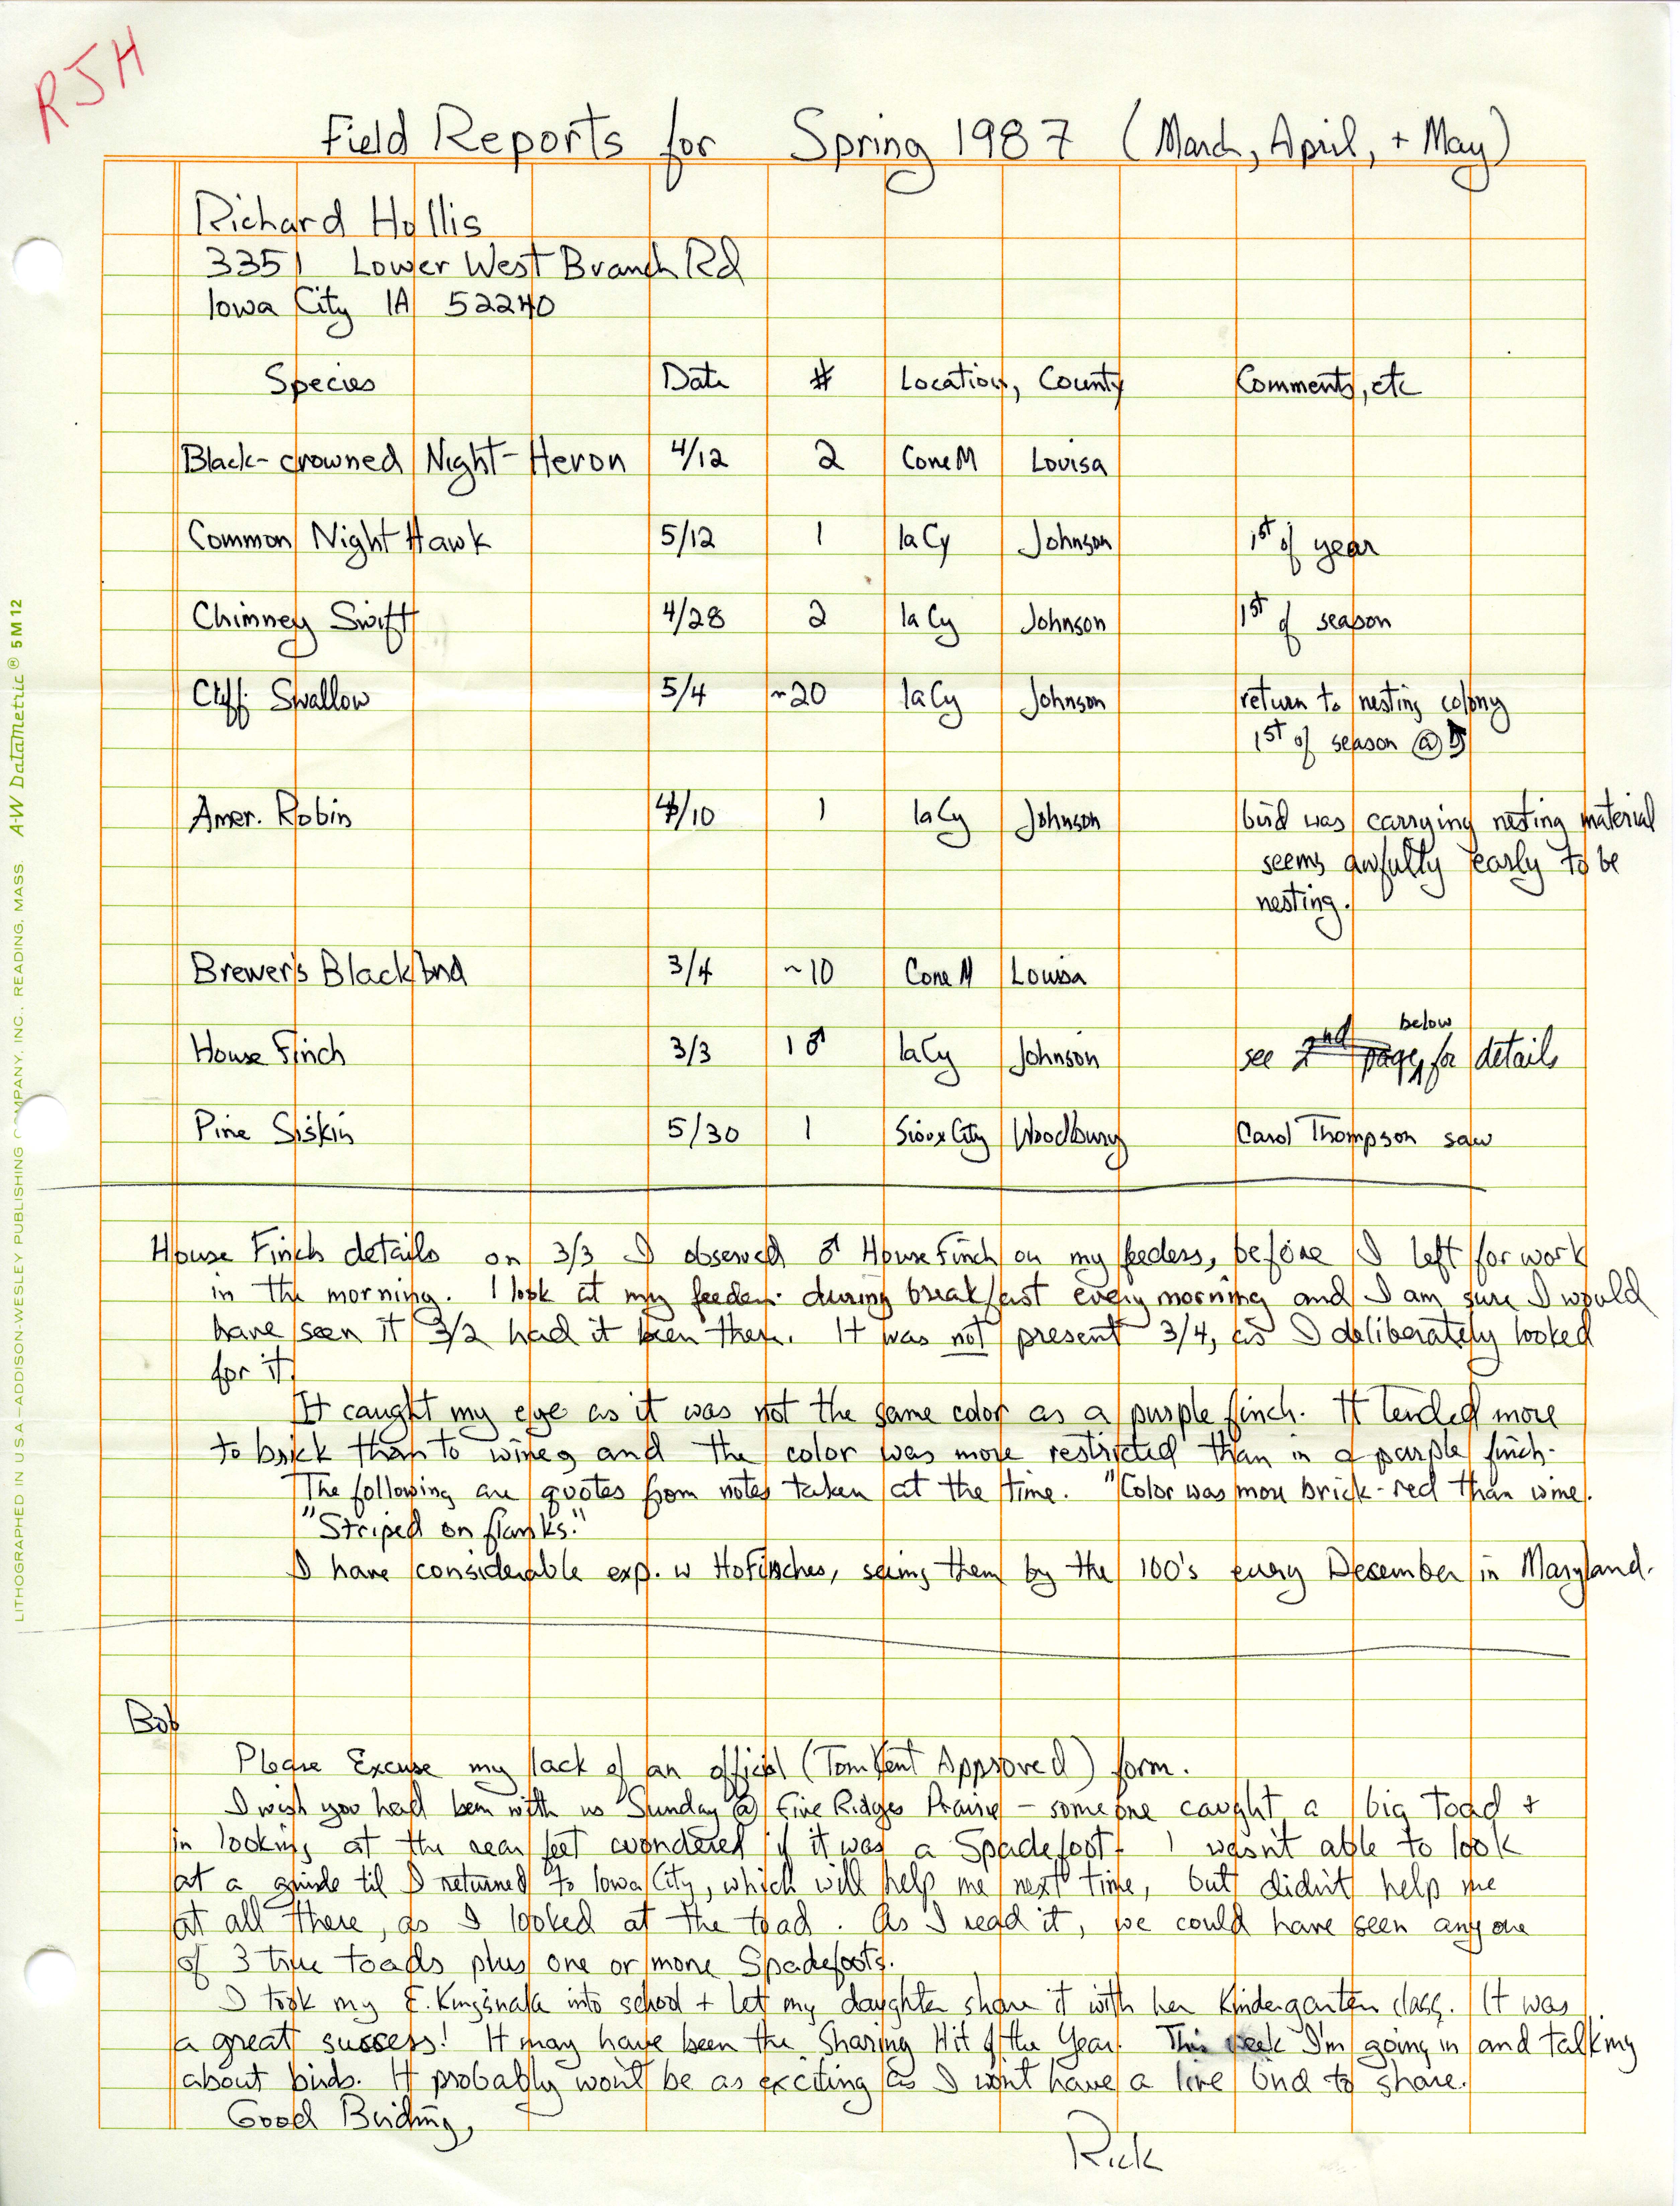 Field notes contributed by Richard Jule Hollis, spring 1987